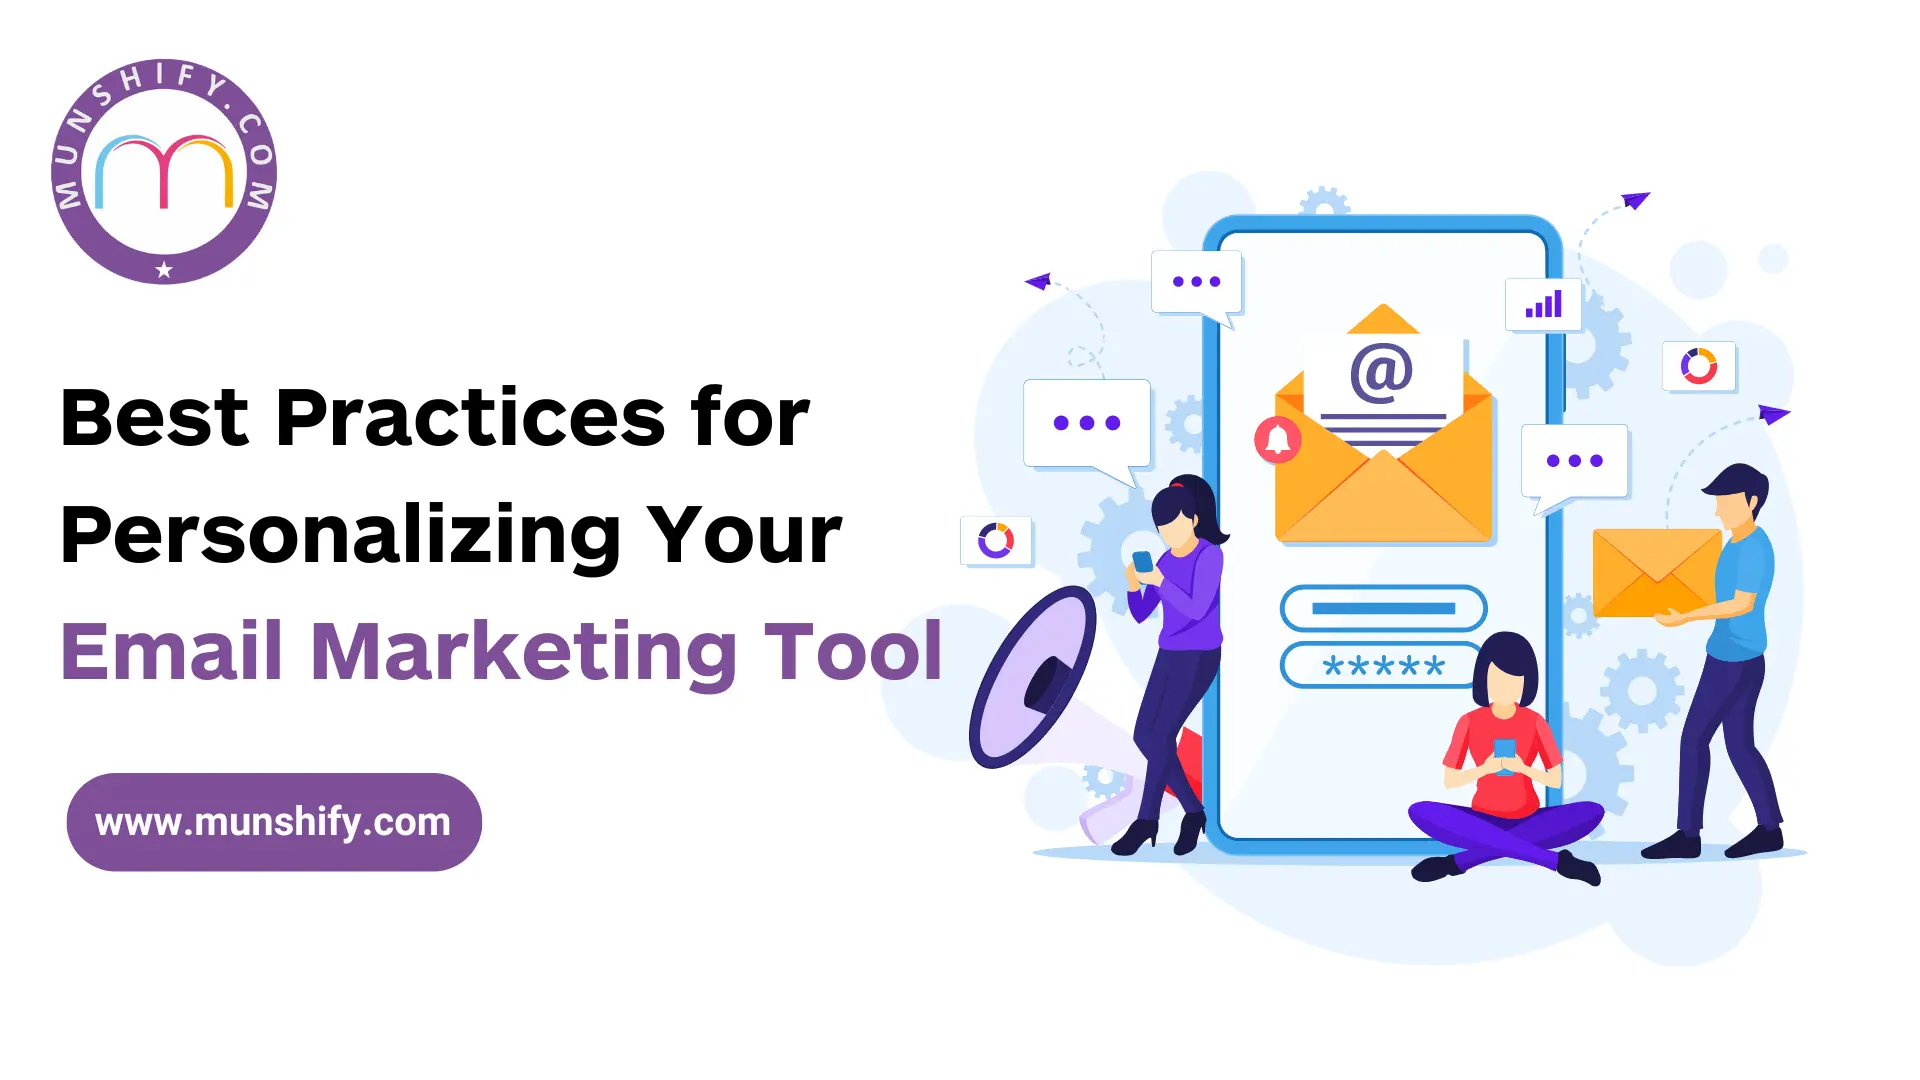 5 Best Practices for Personalizing Your Email Marketing Tool